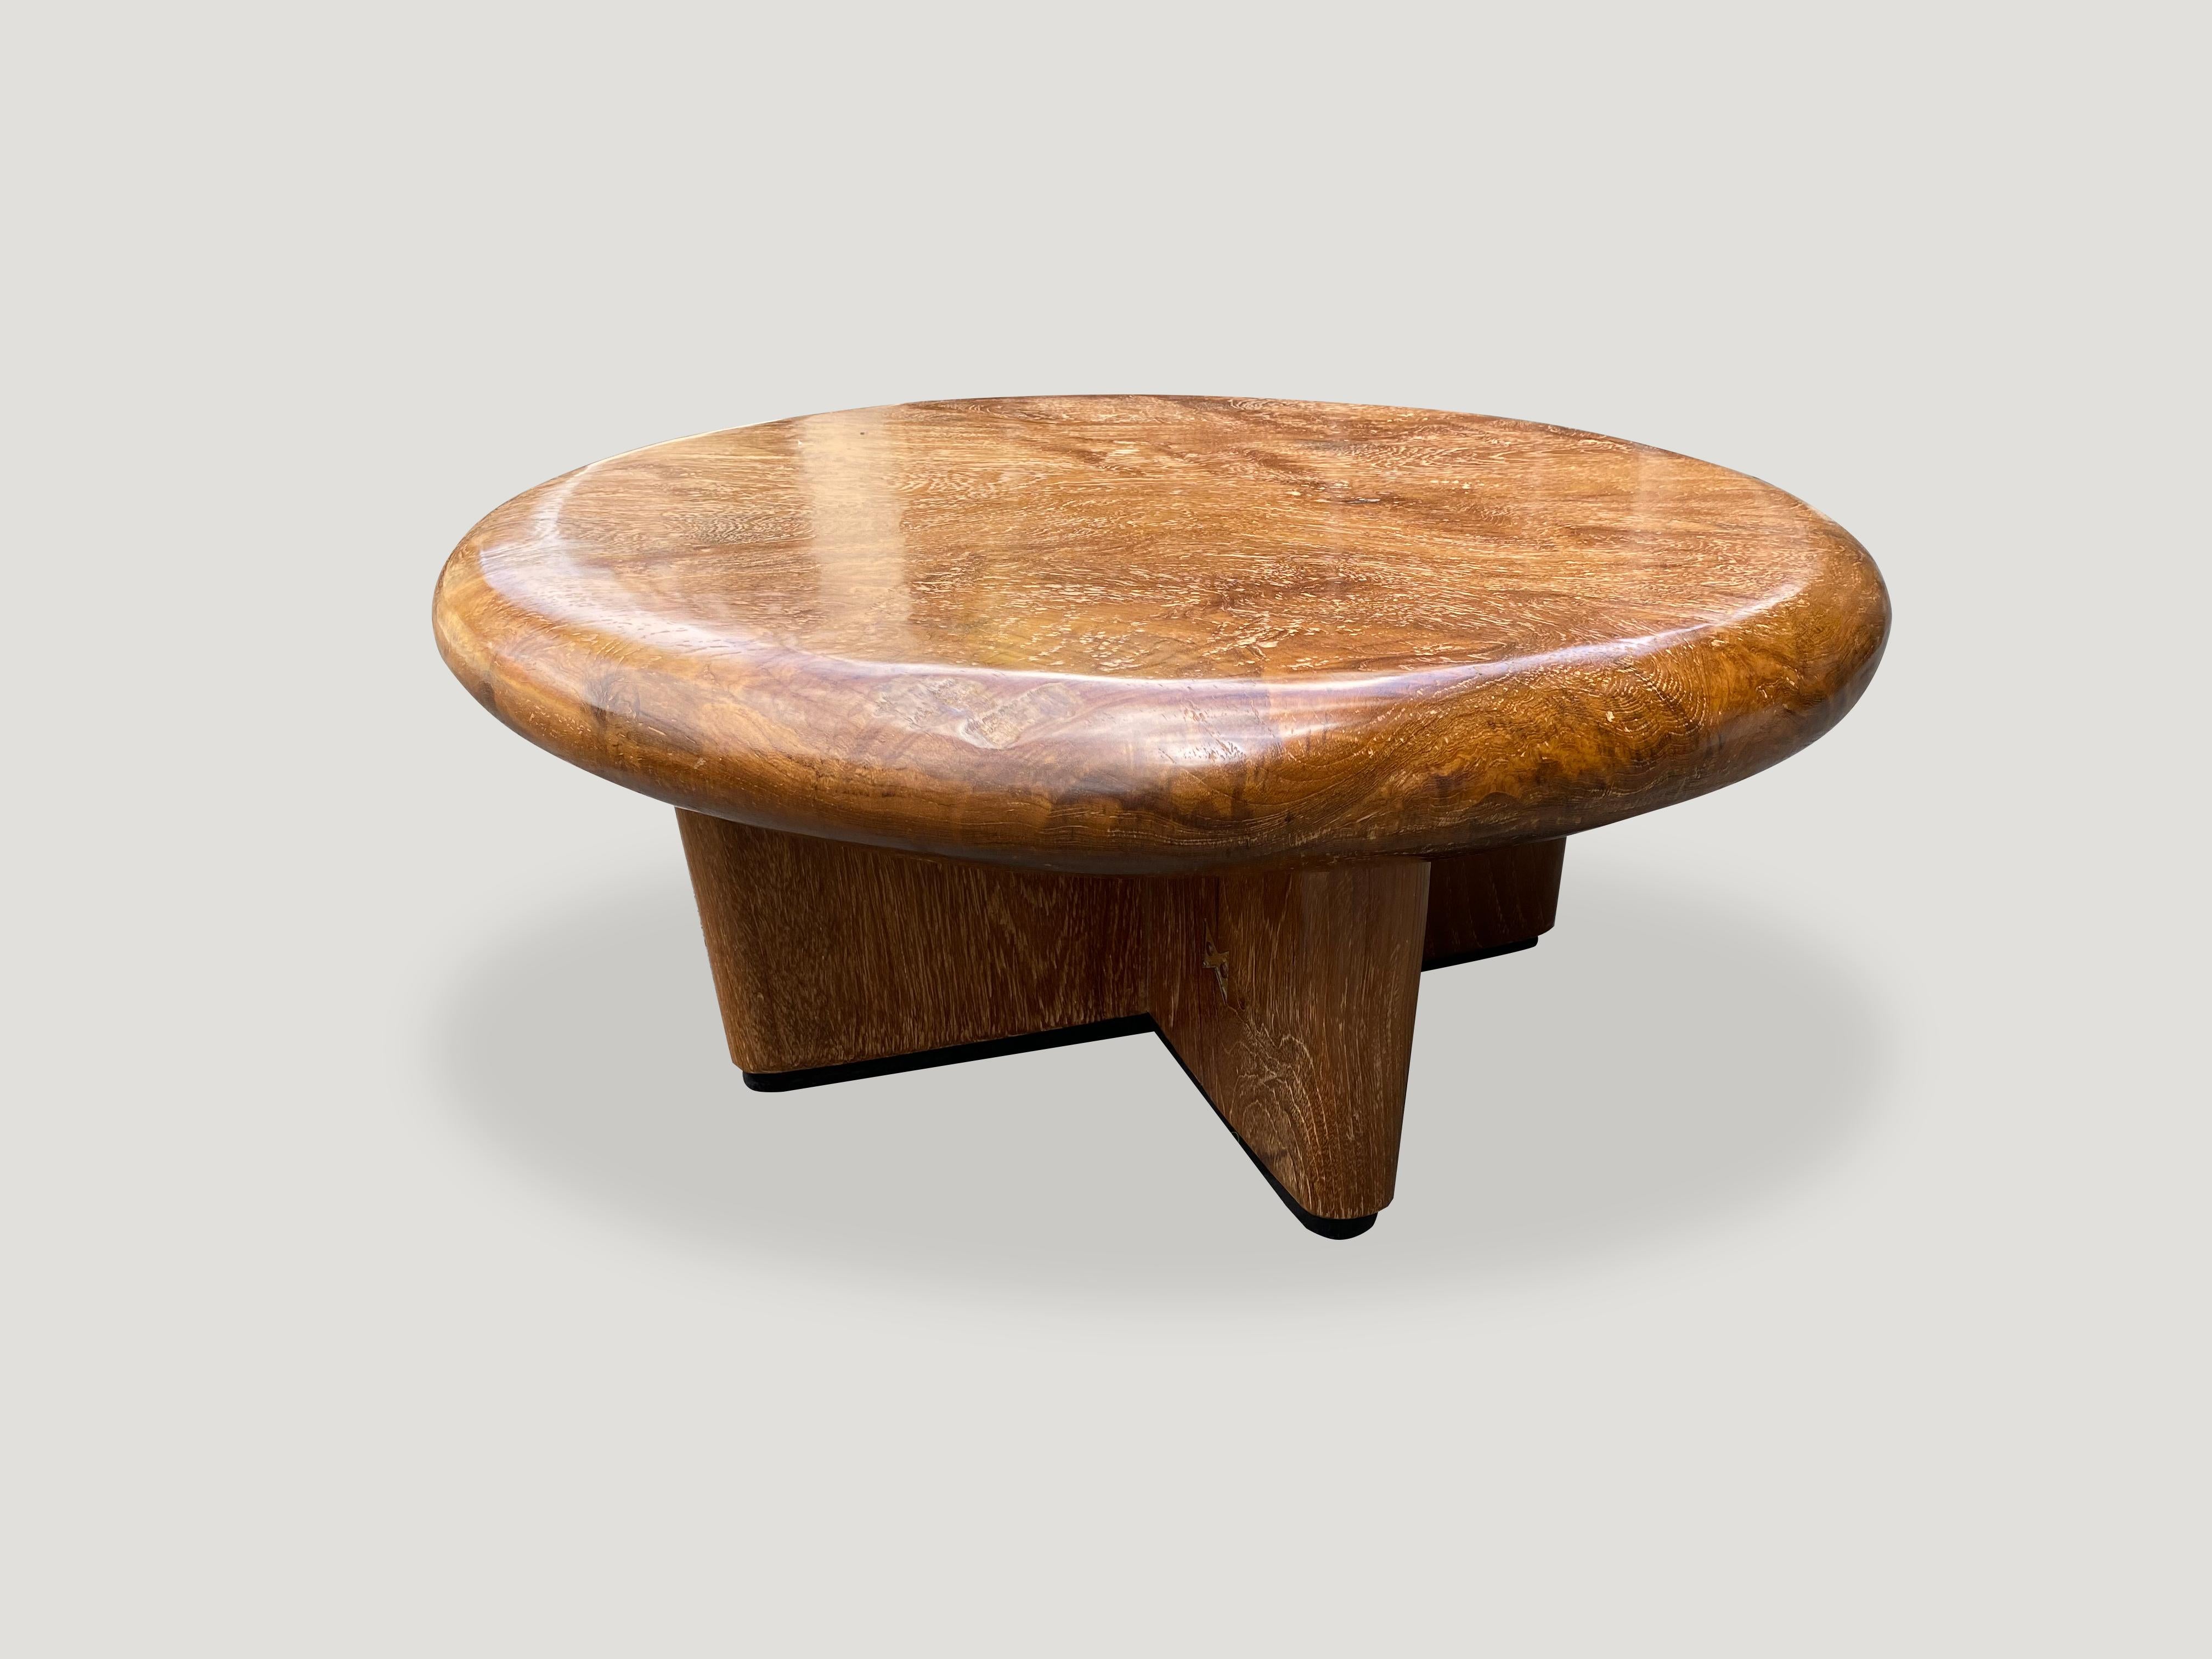 Introducing the Mid Century Couture Collection new to 2021. Furniture constructed by hand from start to finish. A single three inch slab of reclaimed teak wood taken from my finest collection, is hand carved into a stunning coffee table with a